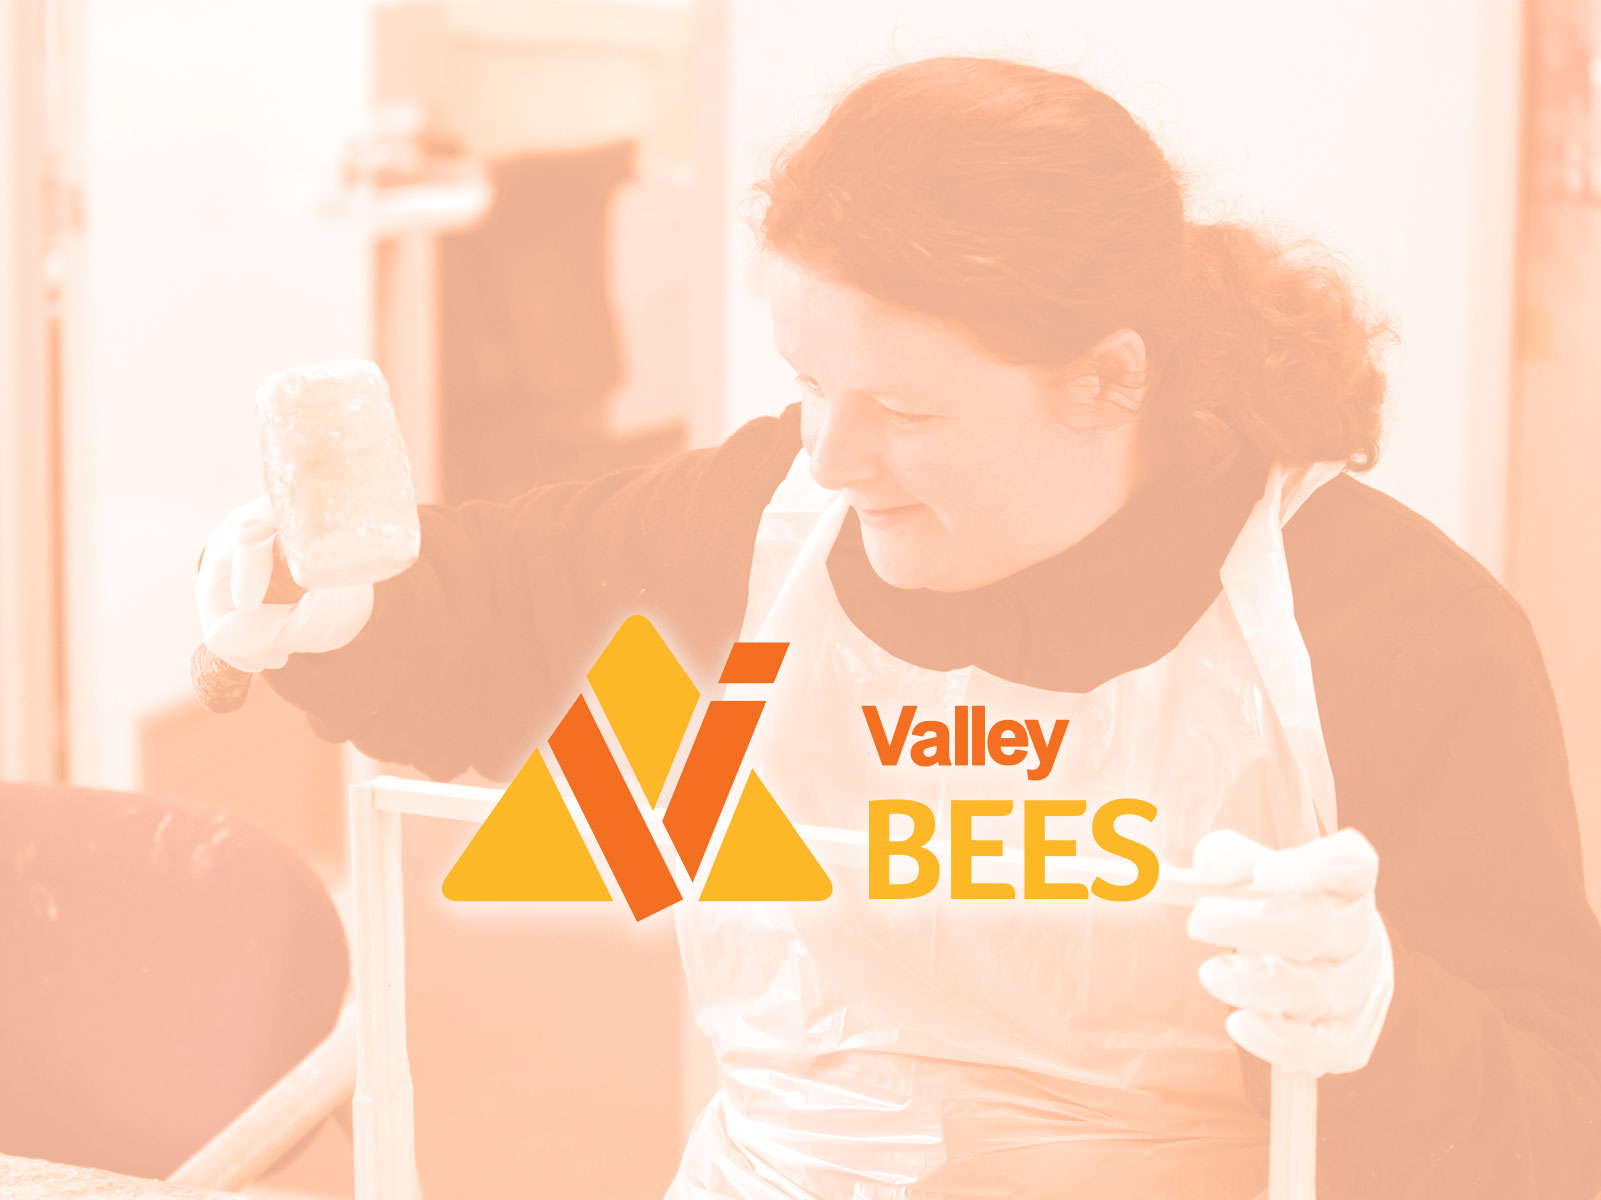 Valley Bees